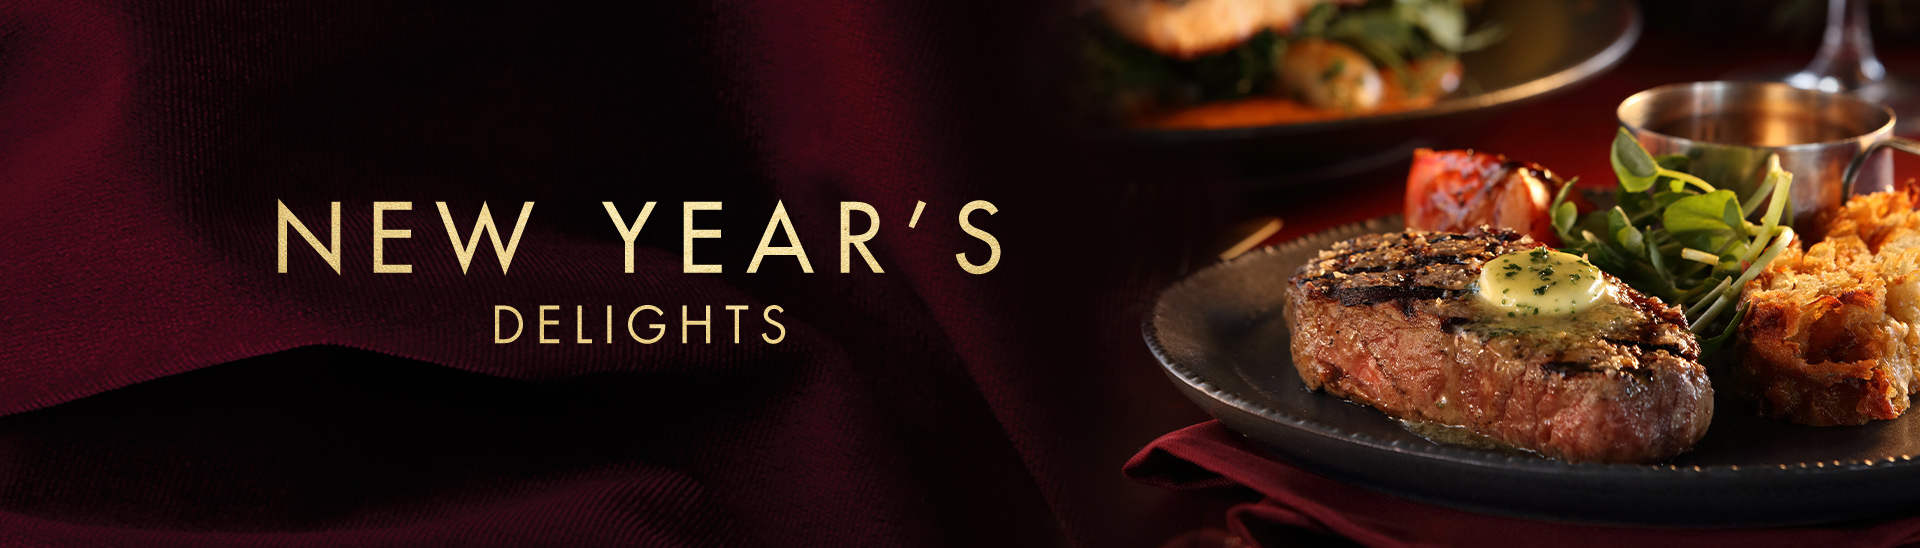 New Year’s Eve 2019 at Miller & Carter Thornhill